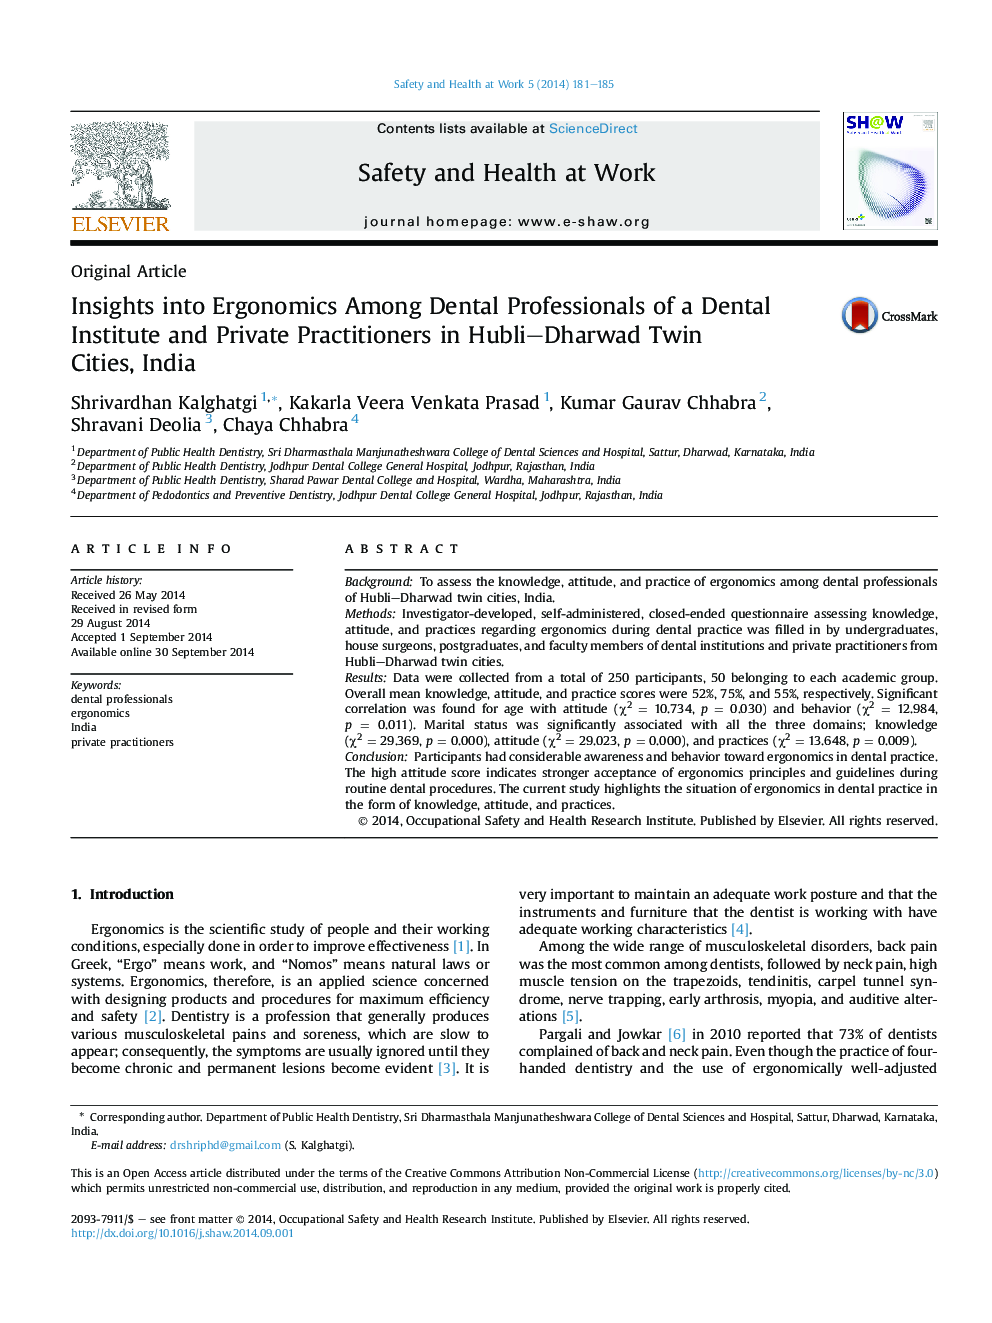 Insights into Ergonomics Among Dental Professionals of a Dental Institute and Private Practitioners in Hubli–Dharwad Twin Cities, India 